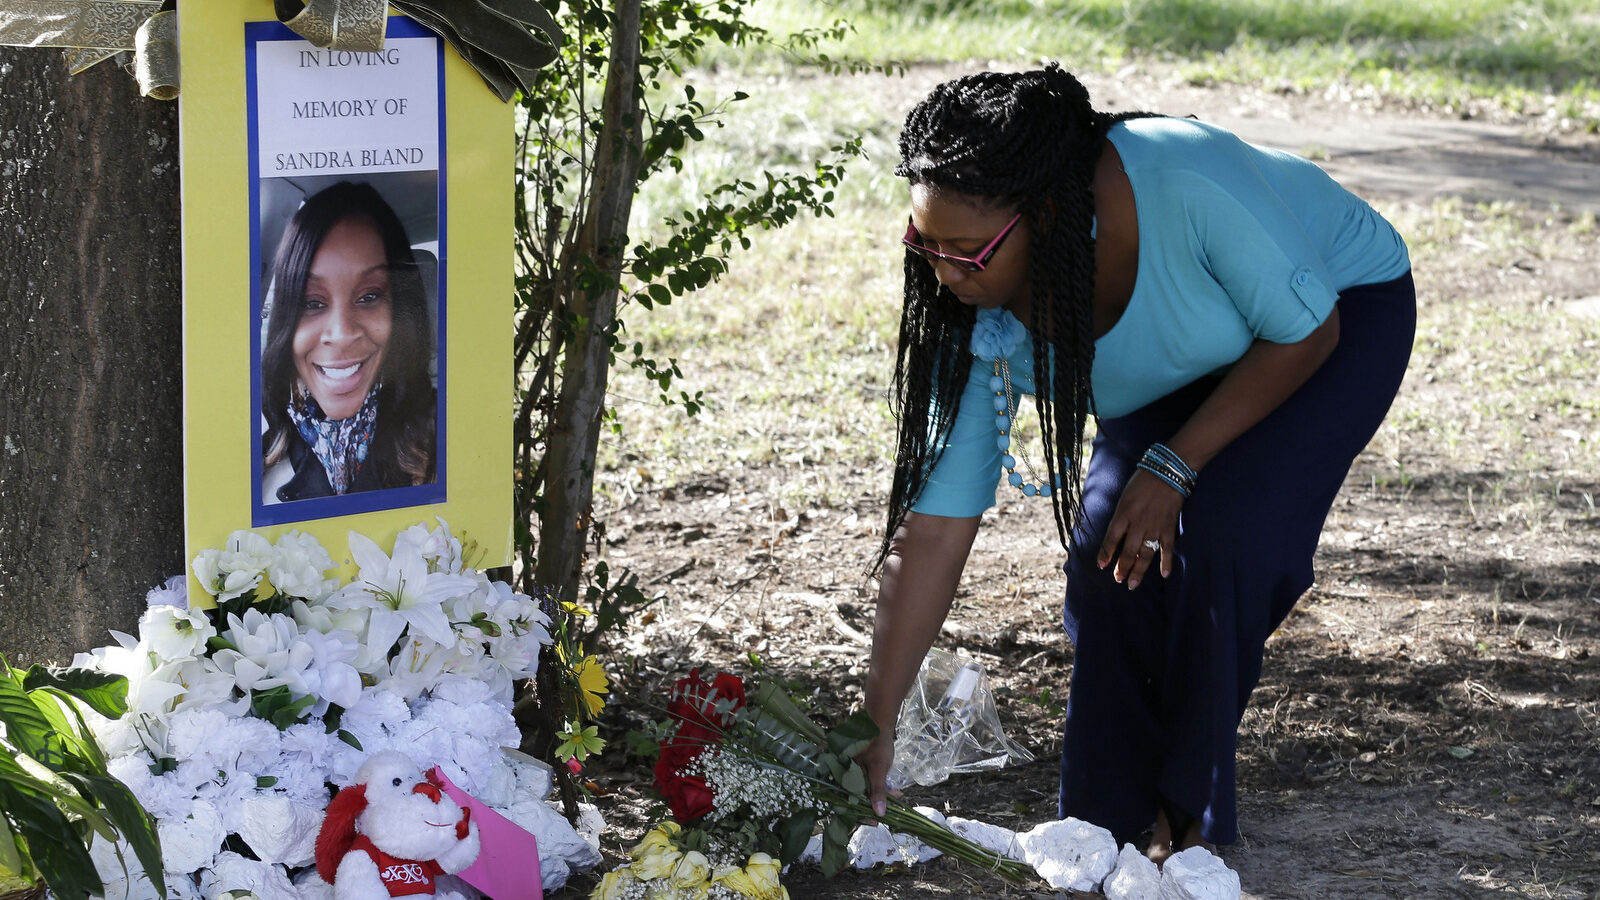 Jeanette Williams places a bouquet of roses at a memorial for Sandra Bland near A&M University, in Prairie View, Texas. (AP/Pat Sullivan)